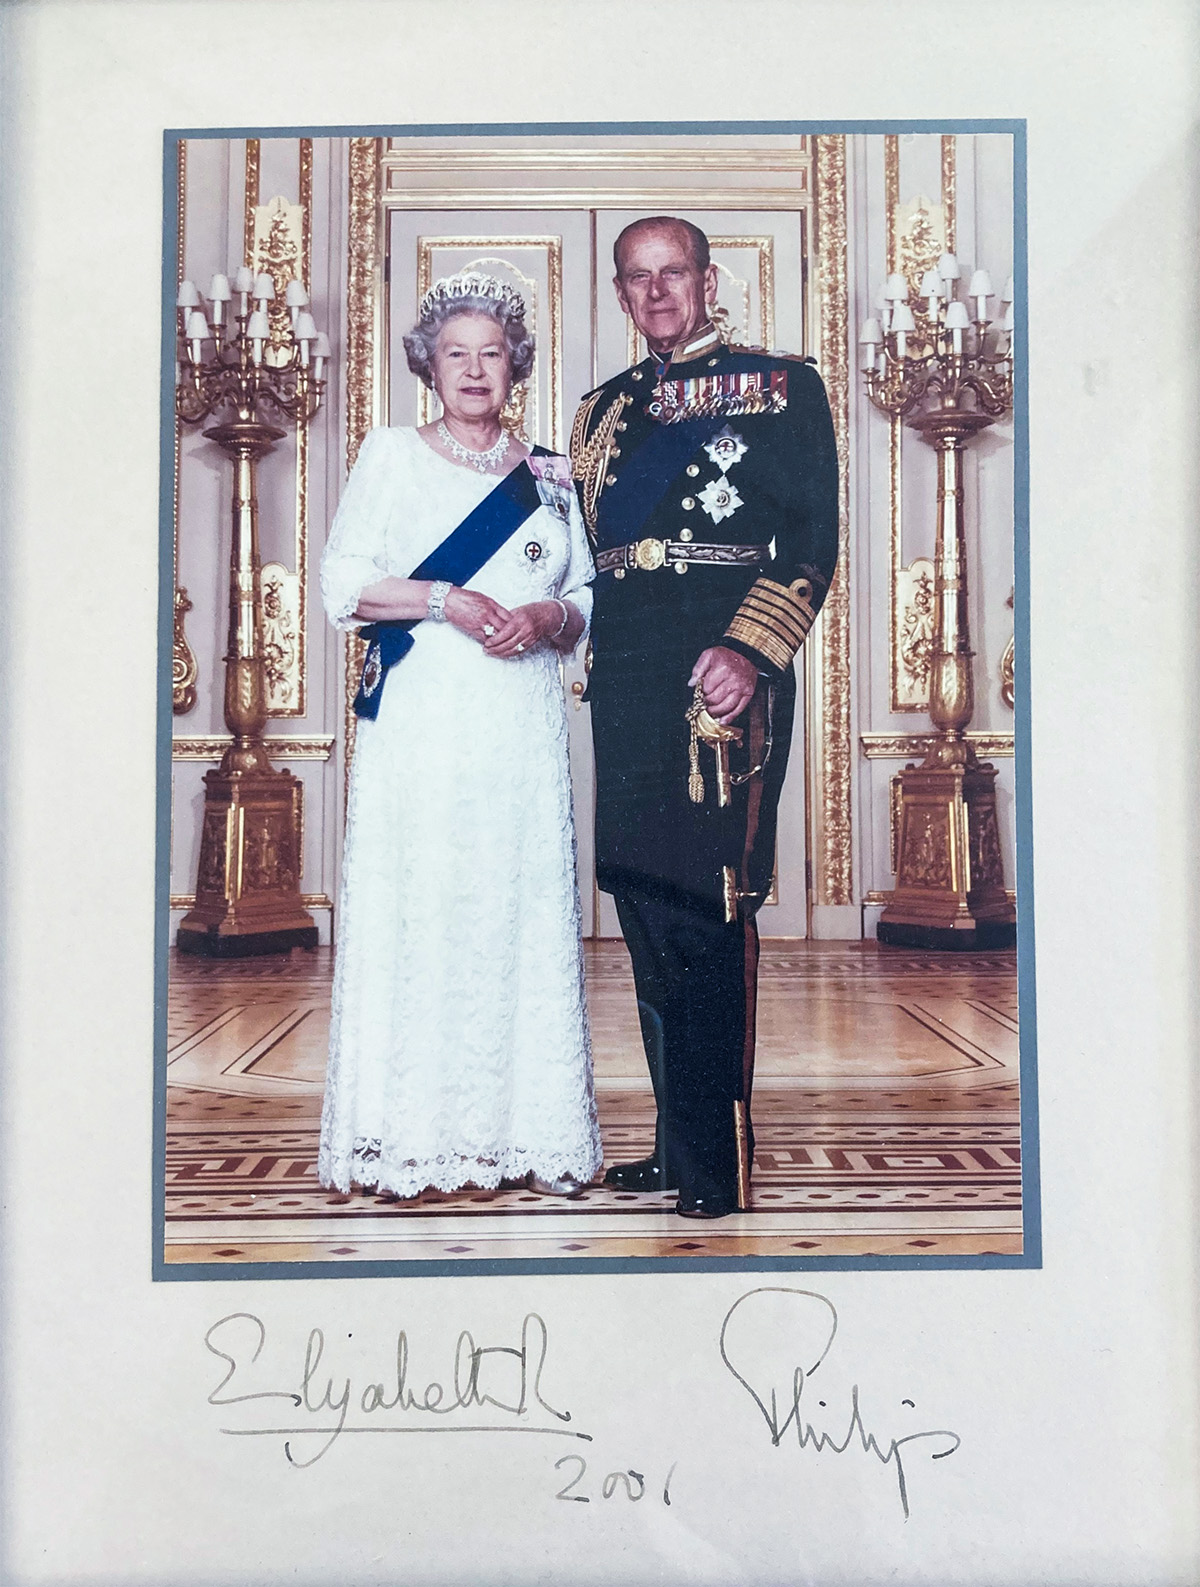 Photo of The Queen and the Duke of Edinburgh given to Alan on his retirement.